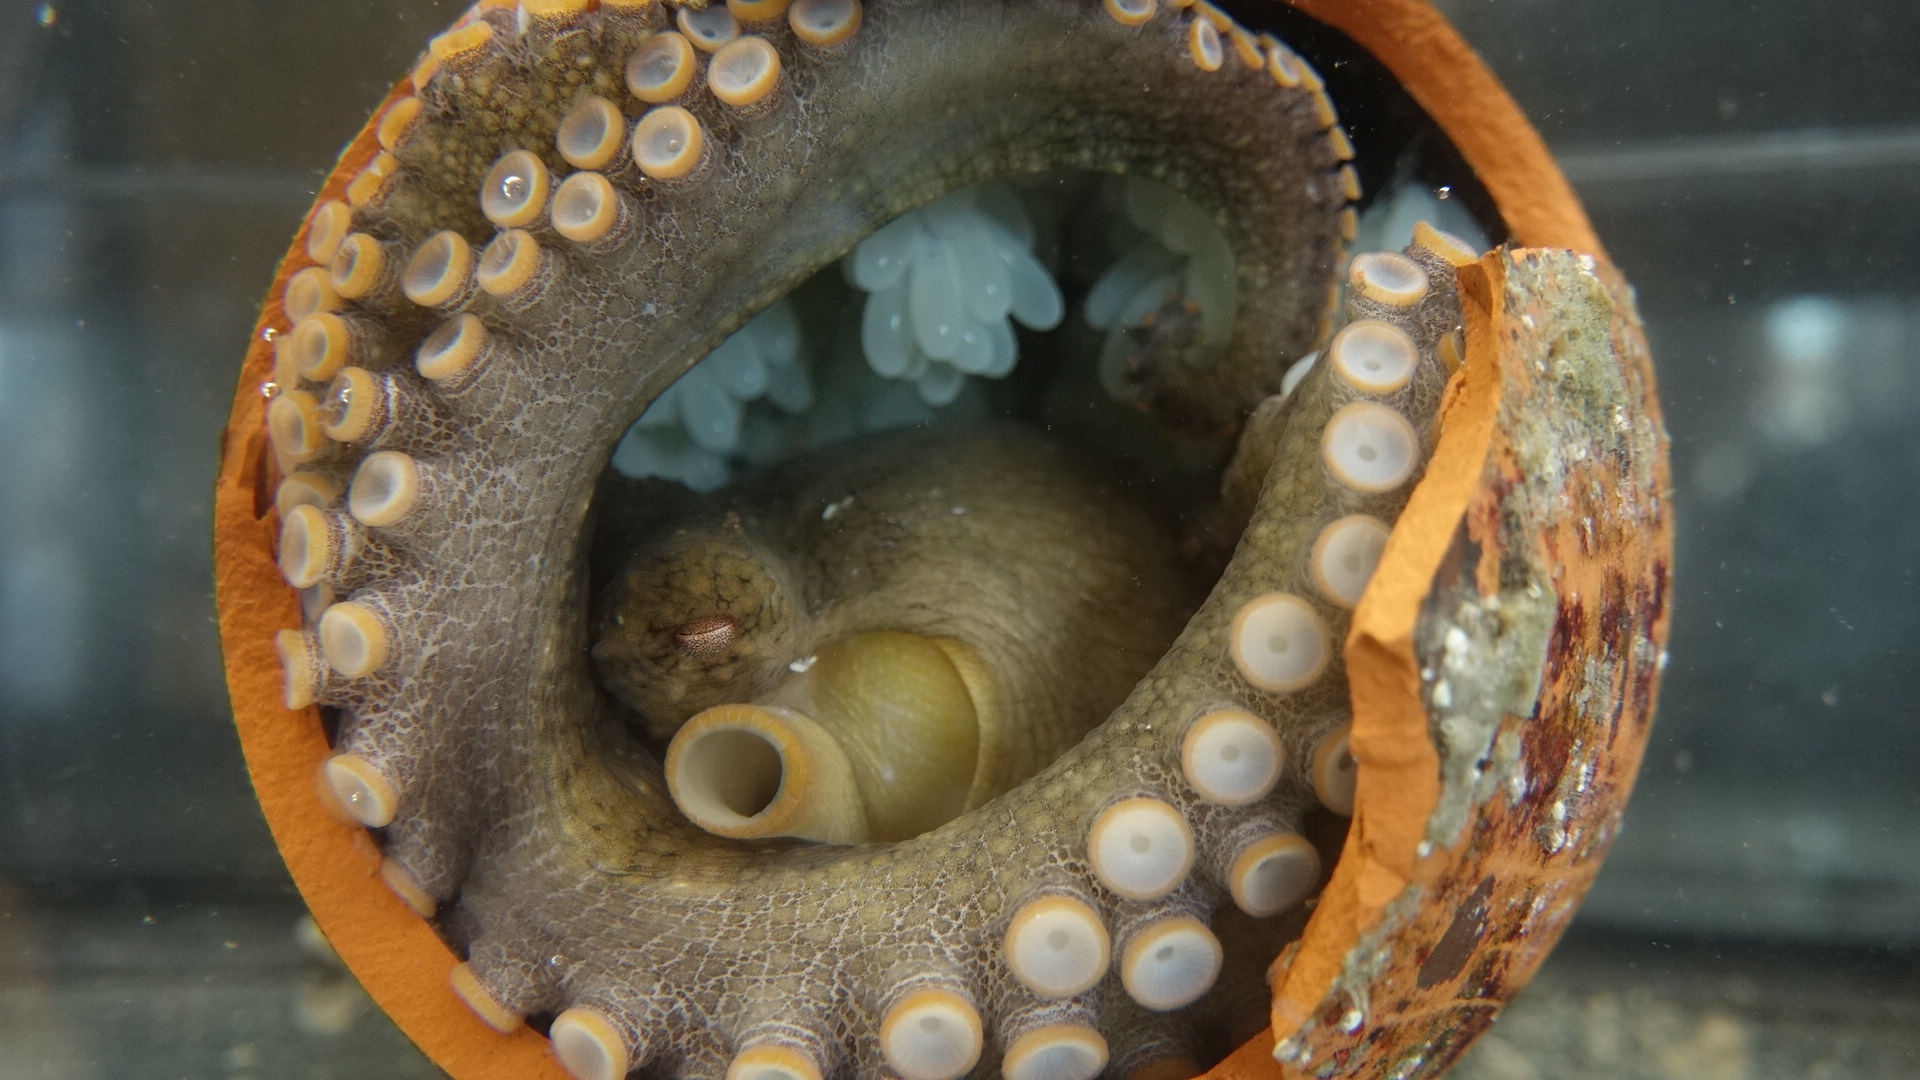 The California two-spotted octopus (Octopus bimaculoides) has a circular blue eyespot on both sides of its head.